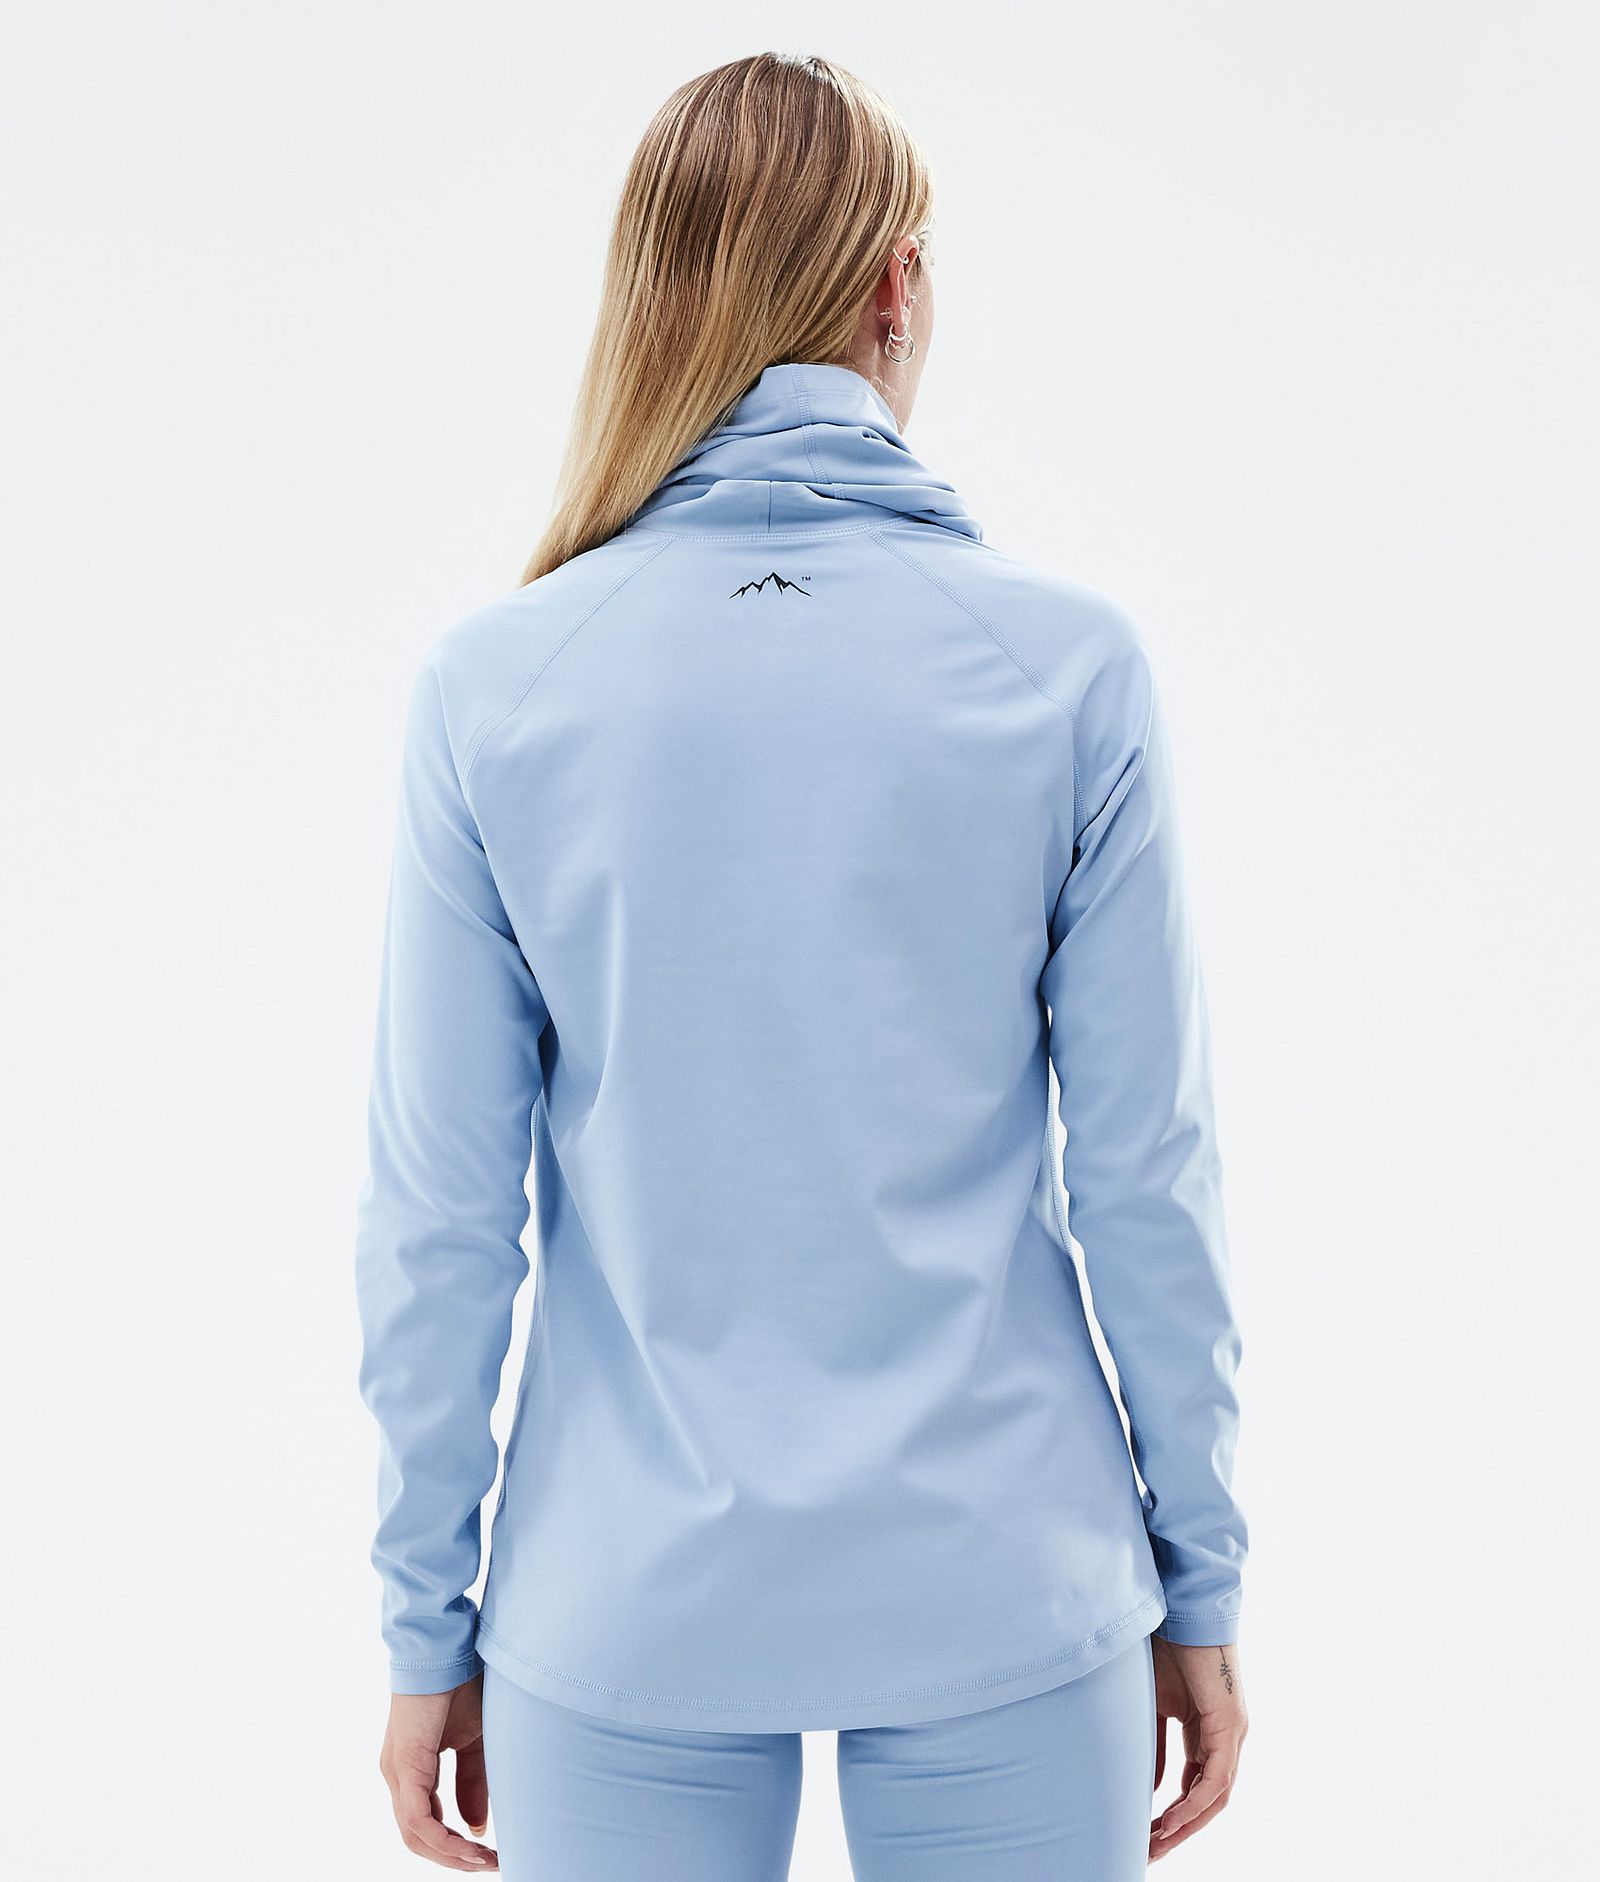 Dope Snuggle W Base Layer Top Women 2X-Up Light Blue